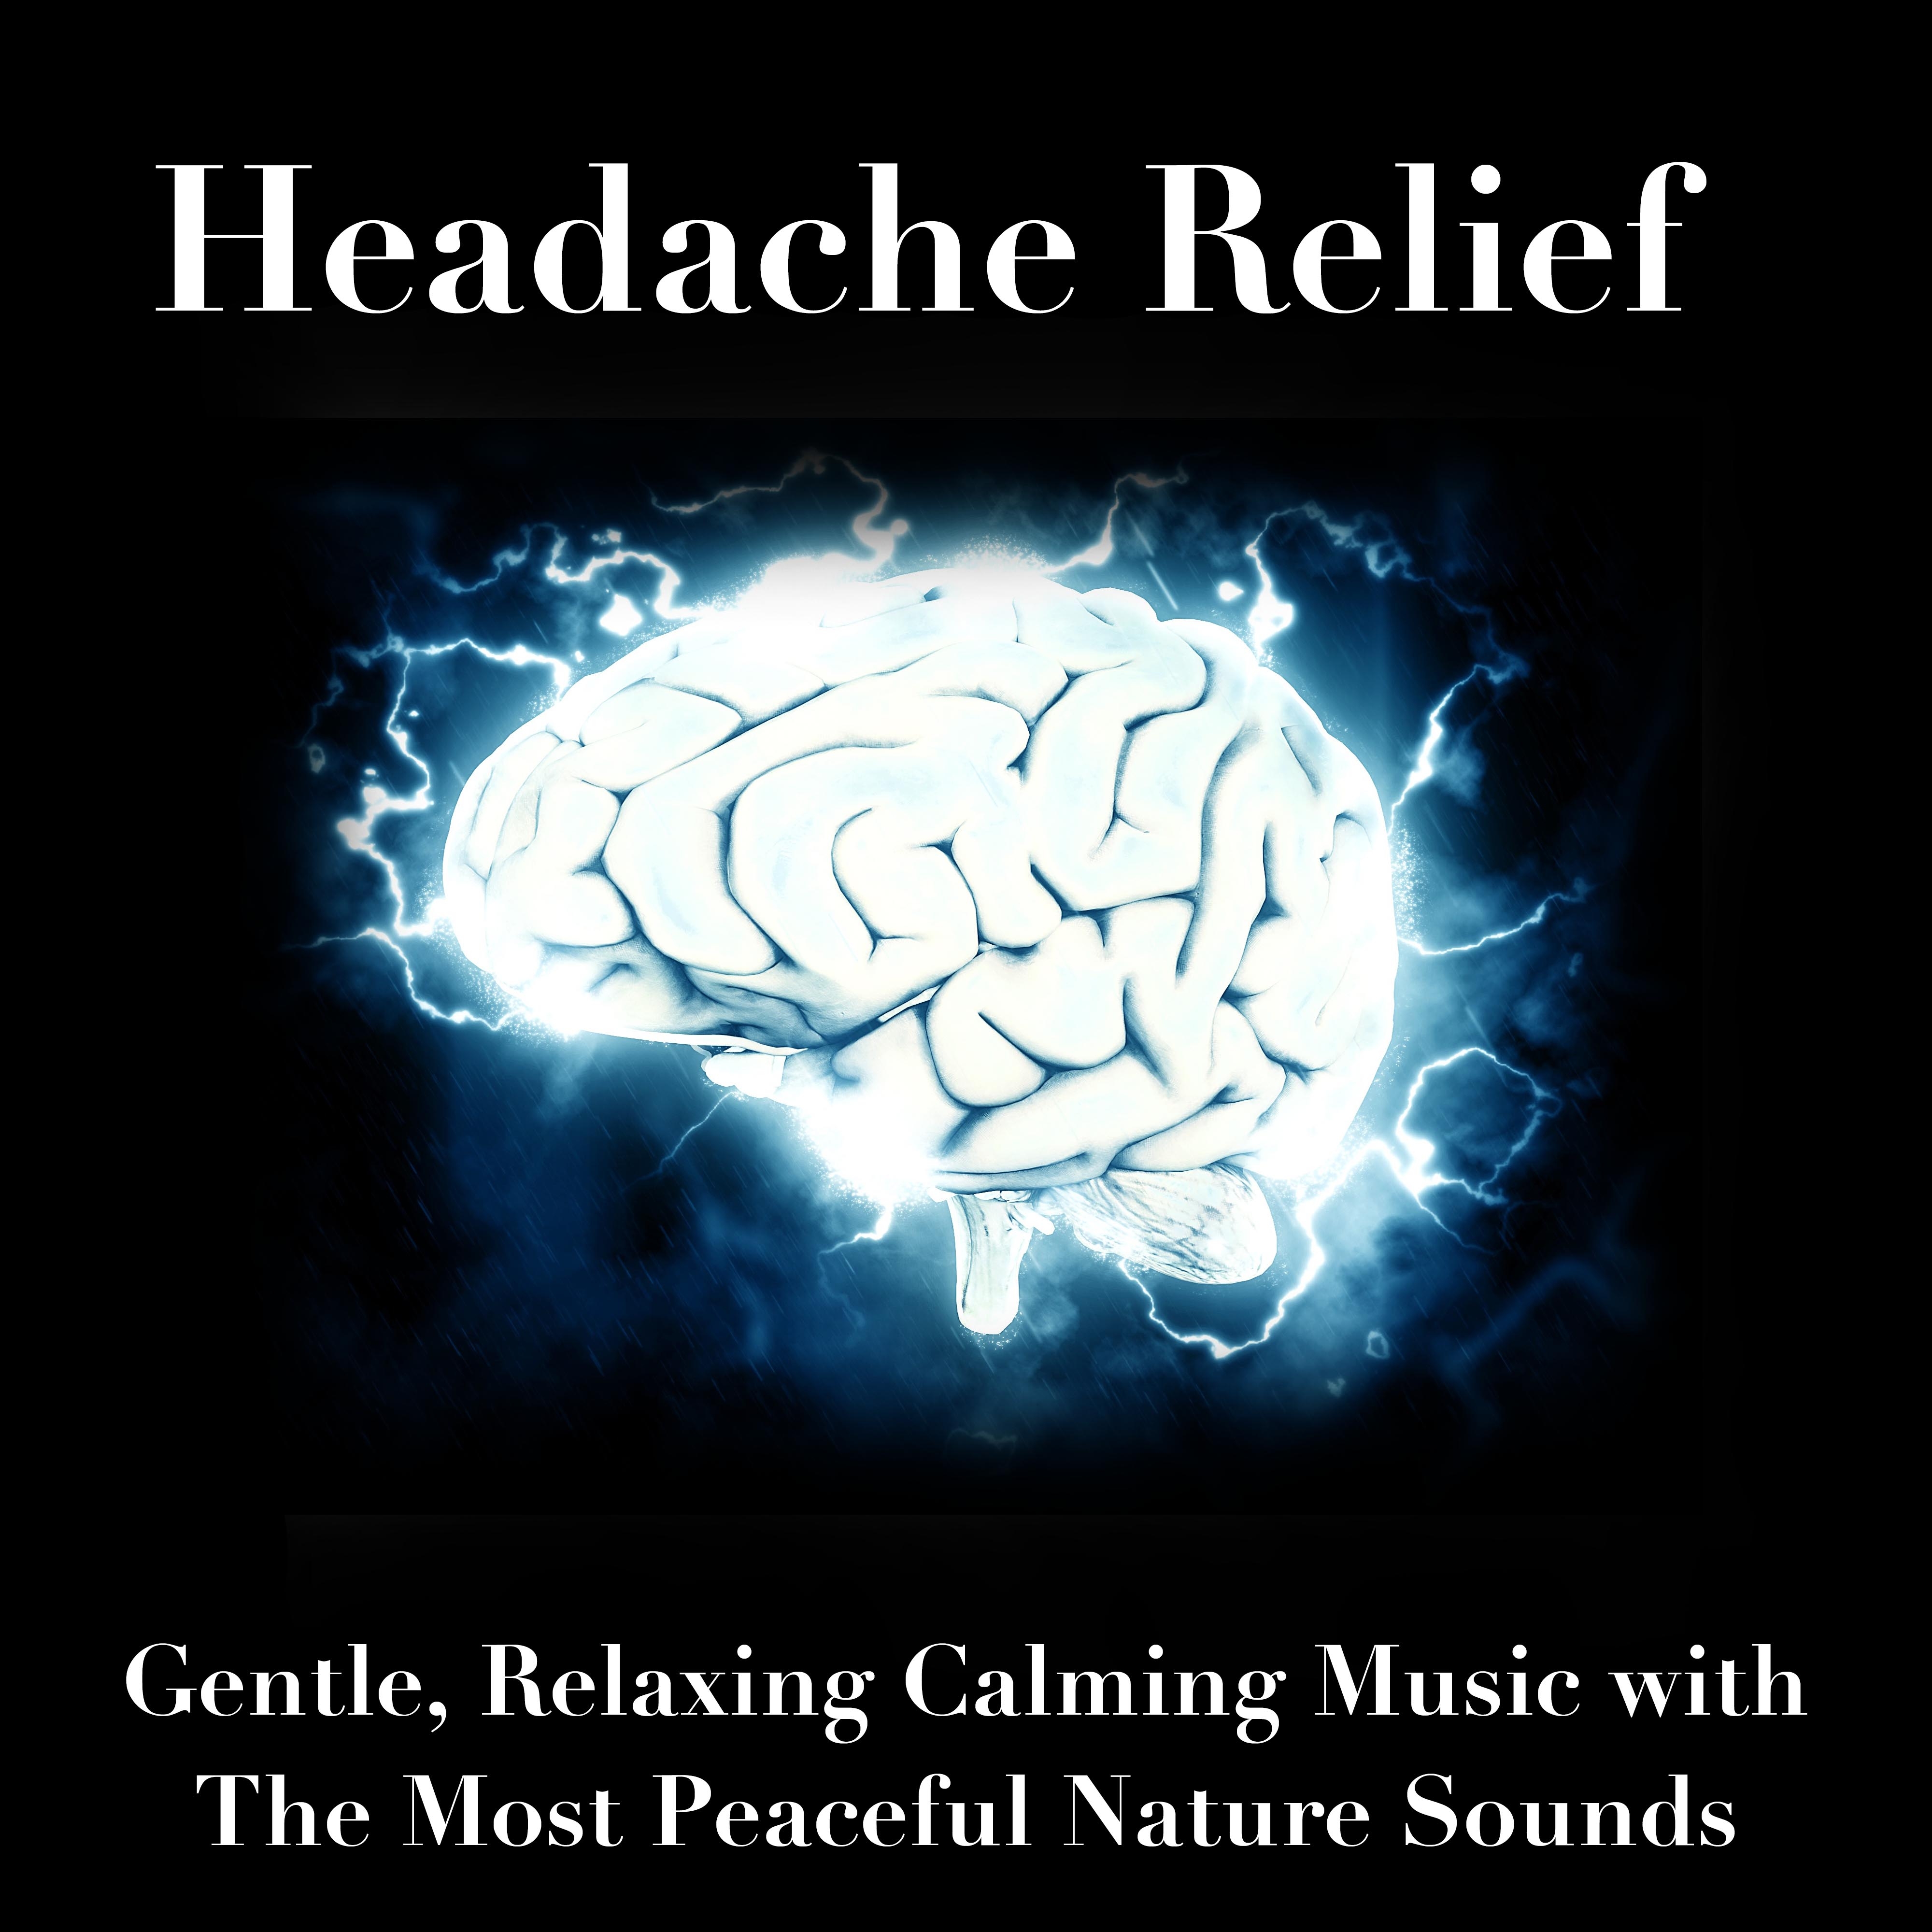 Headache Relief: Gentle, Relaxing Calming Music with The Most Peaceful Nature Sounds to Relax the Mind